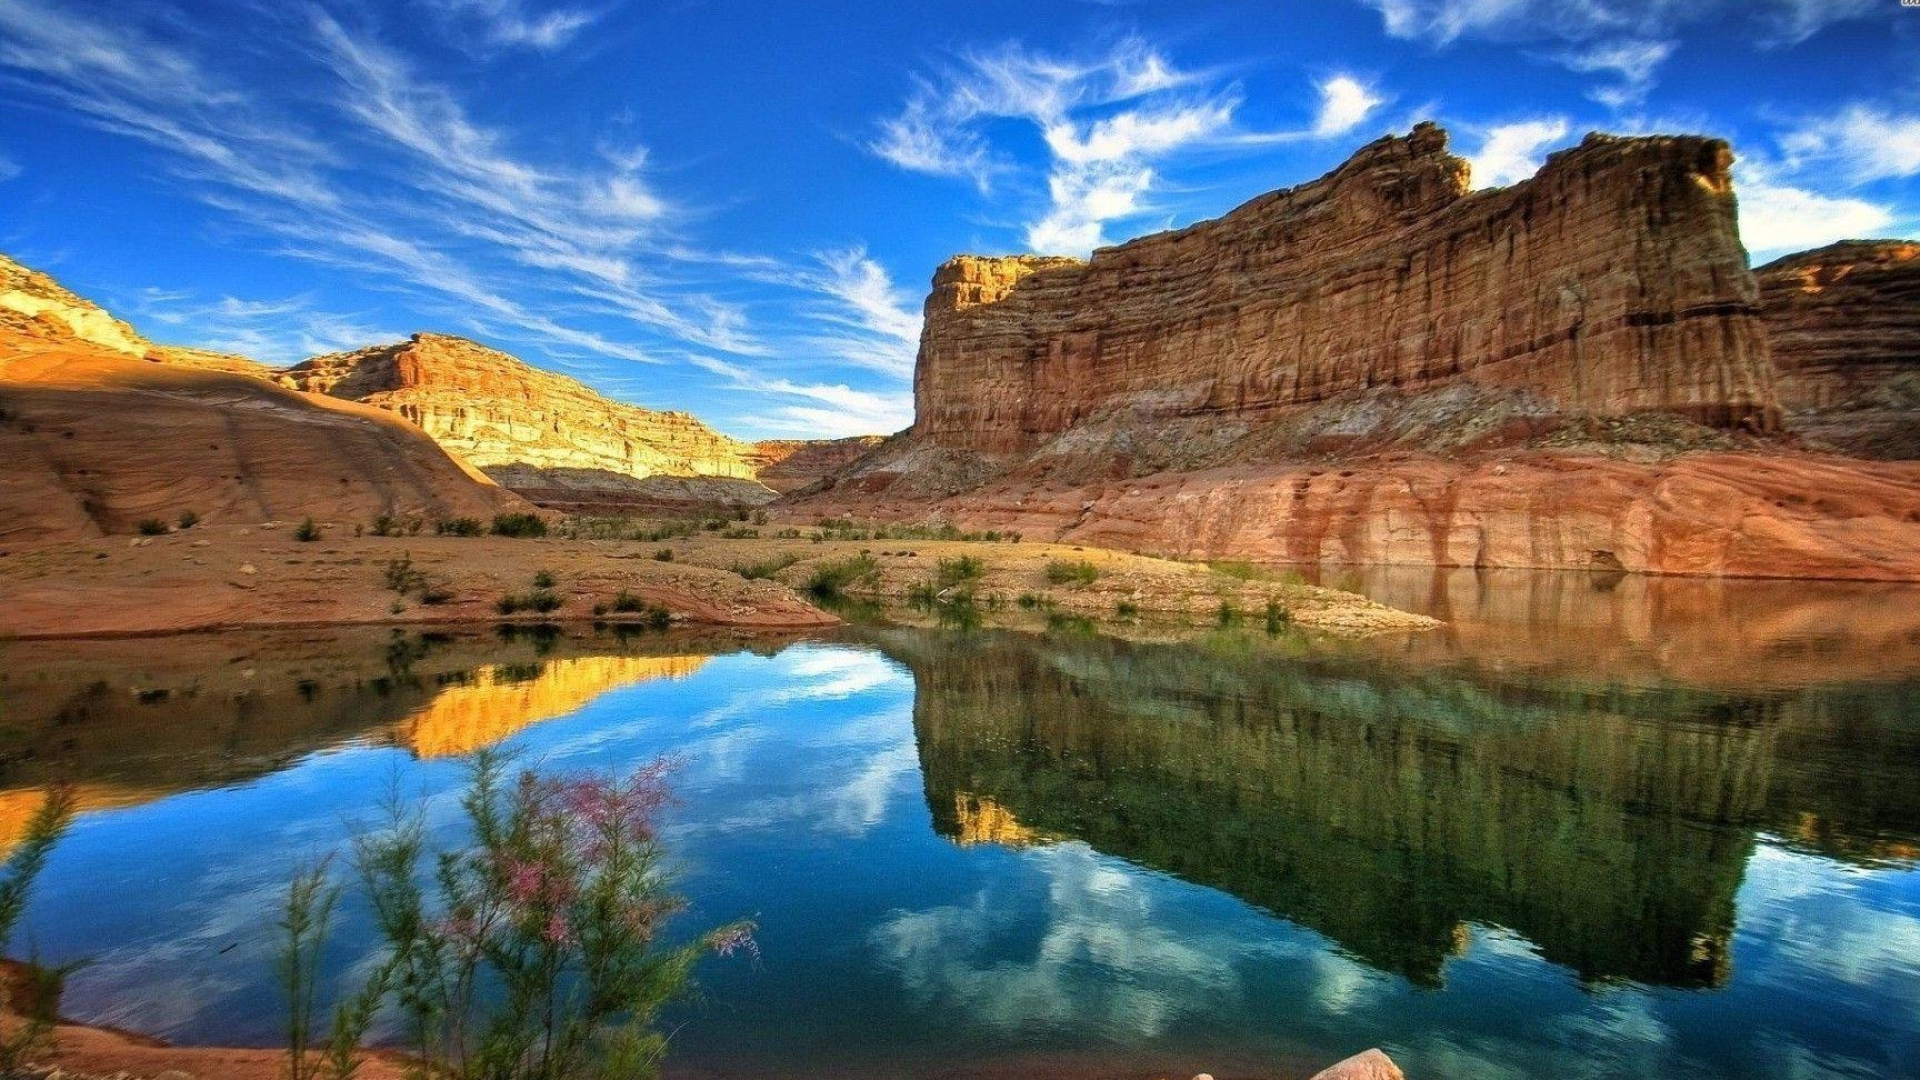 Colorado River, Grand Canyon wallpapers, Widescreen HD, National Geographic, 1920x1080 Full HD Desktop